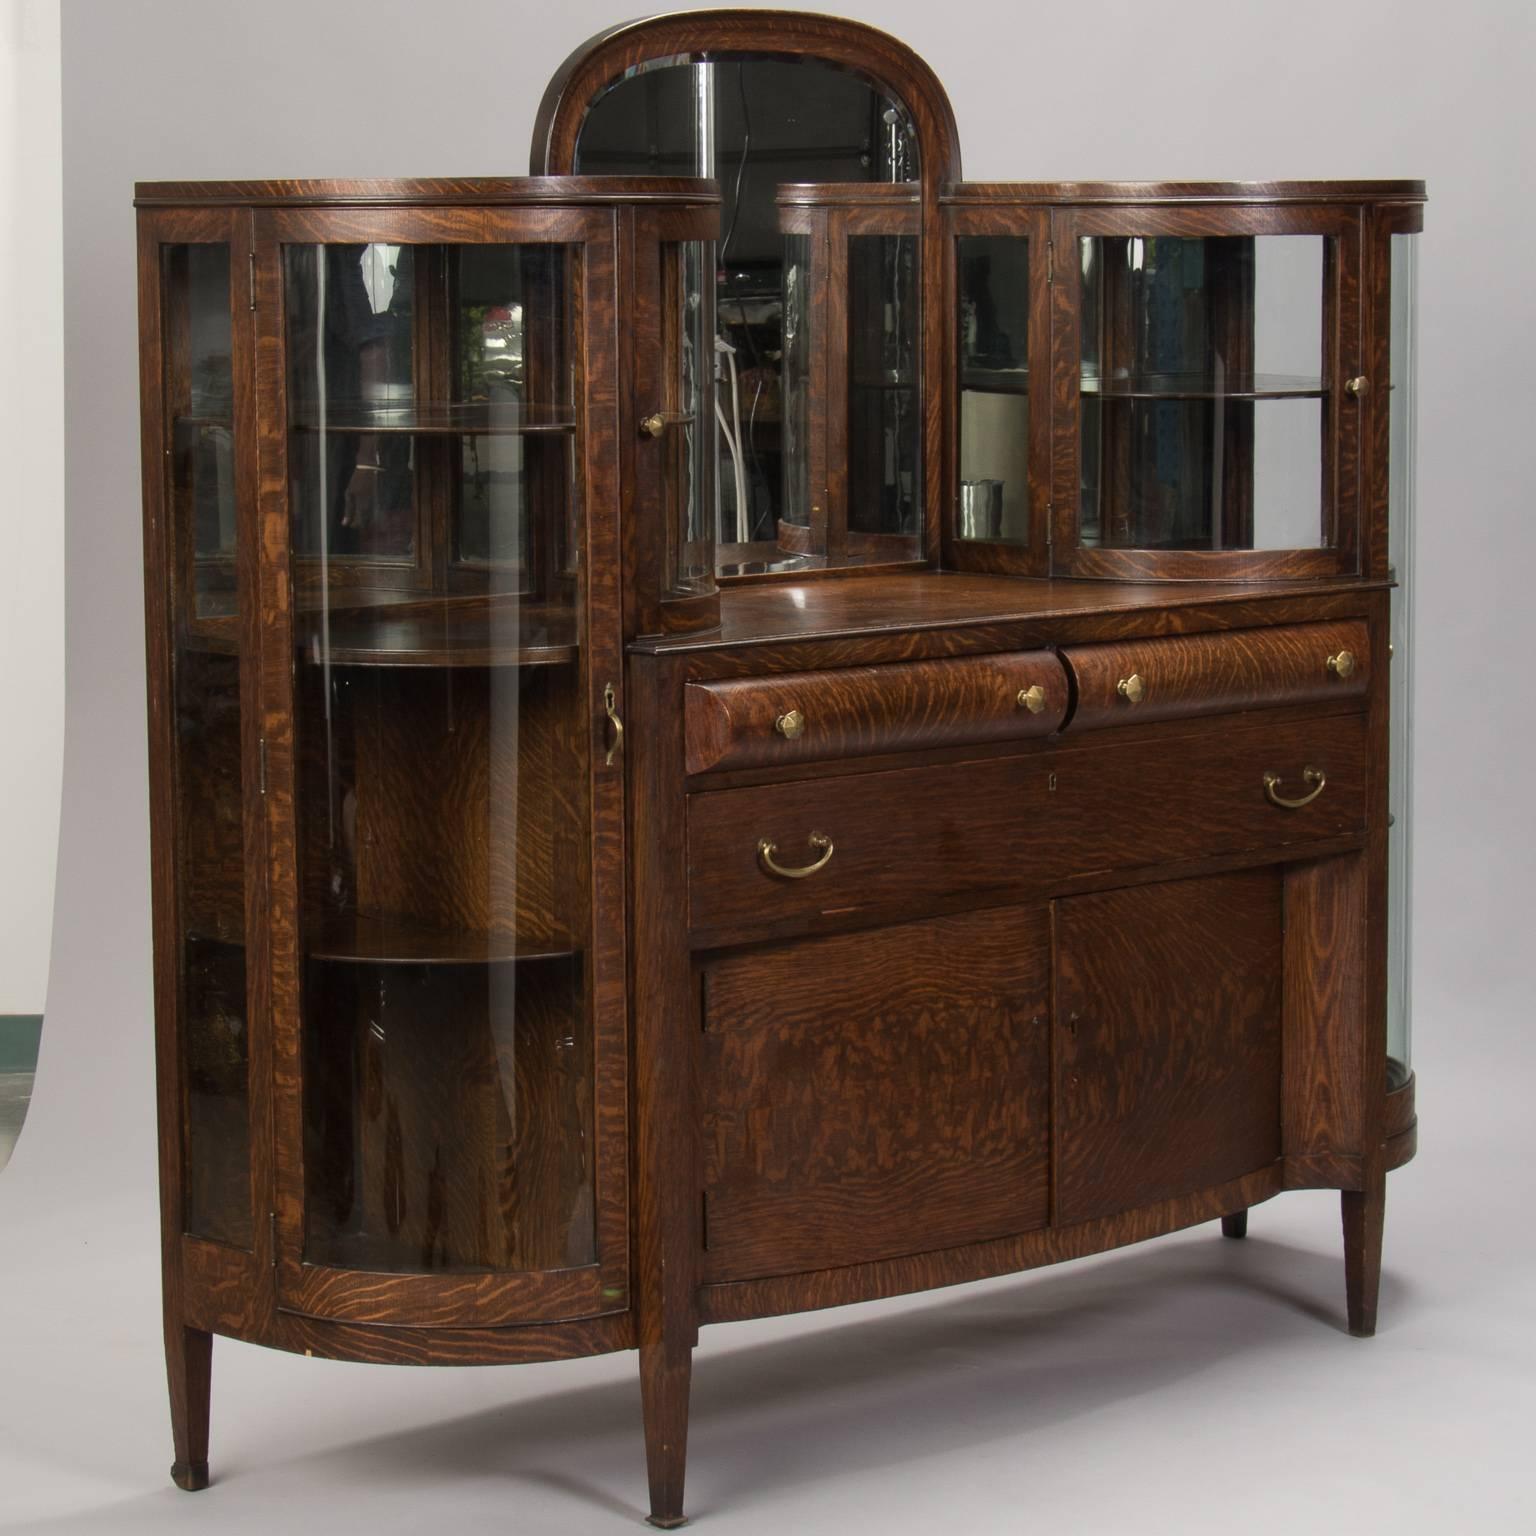 Quarter sawn oak cabinet flanked with two curved glass displays, circa 1900-1905. Centre arched and bevelled mirror, two centre curved front drawers over a single, deeper drawer and lower storage with two doors. Missing original keys (cabinets are